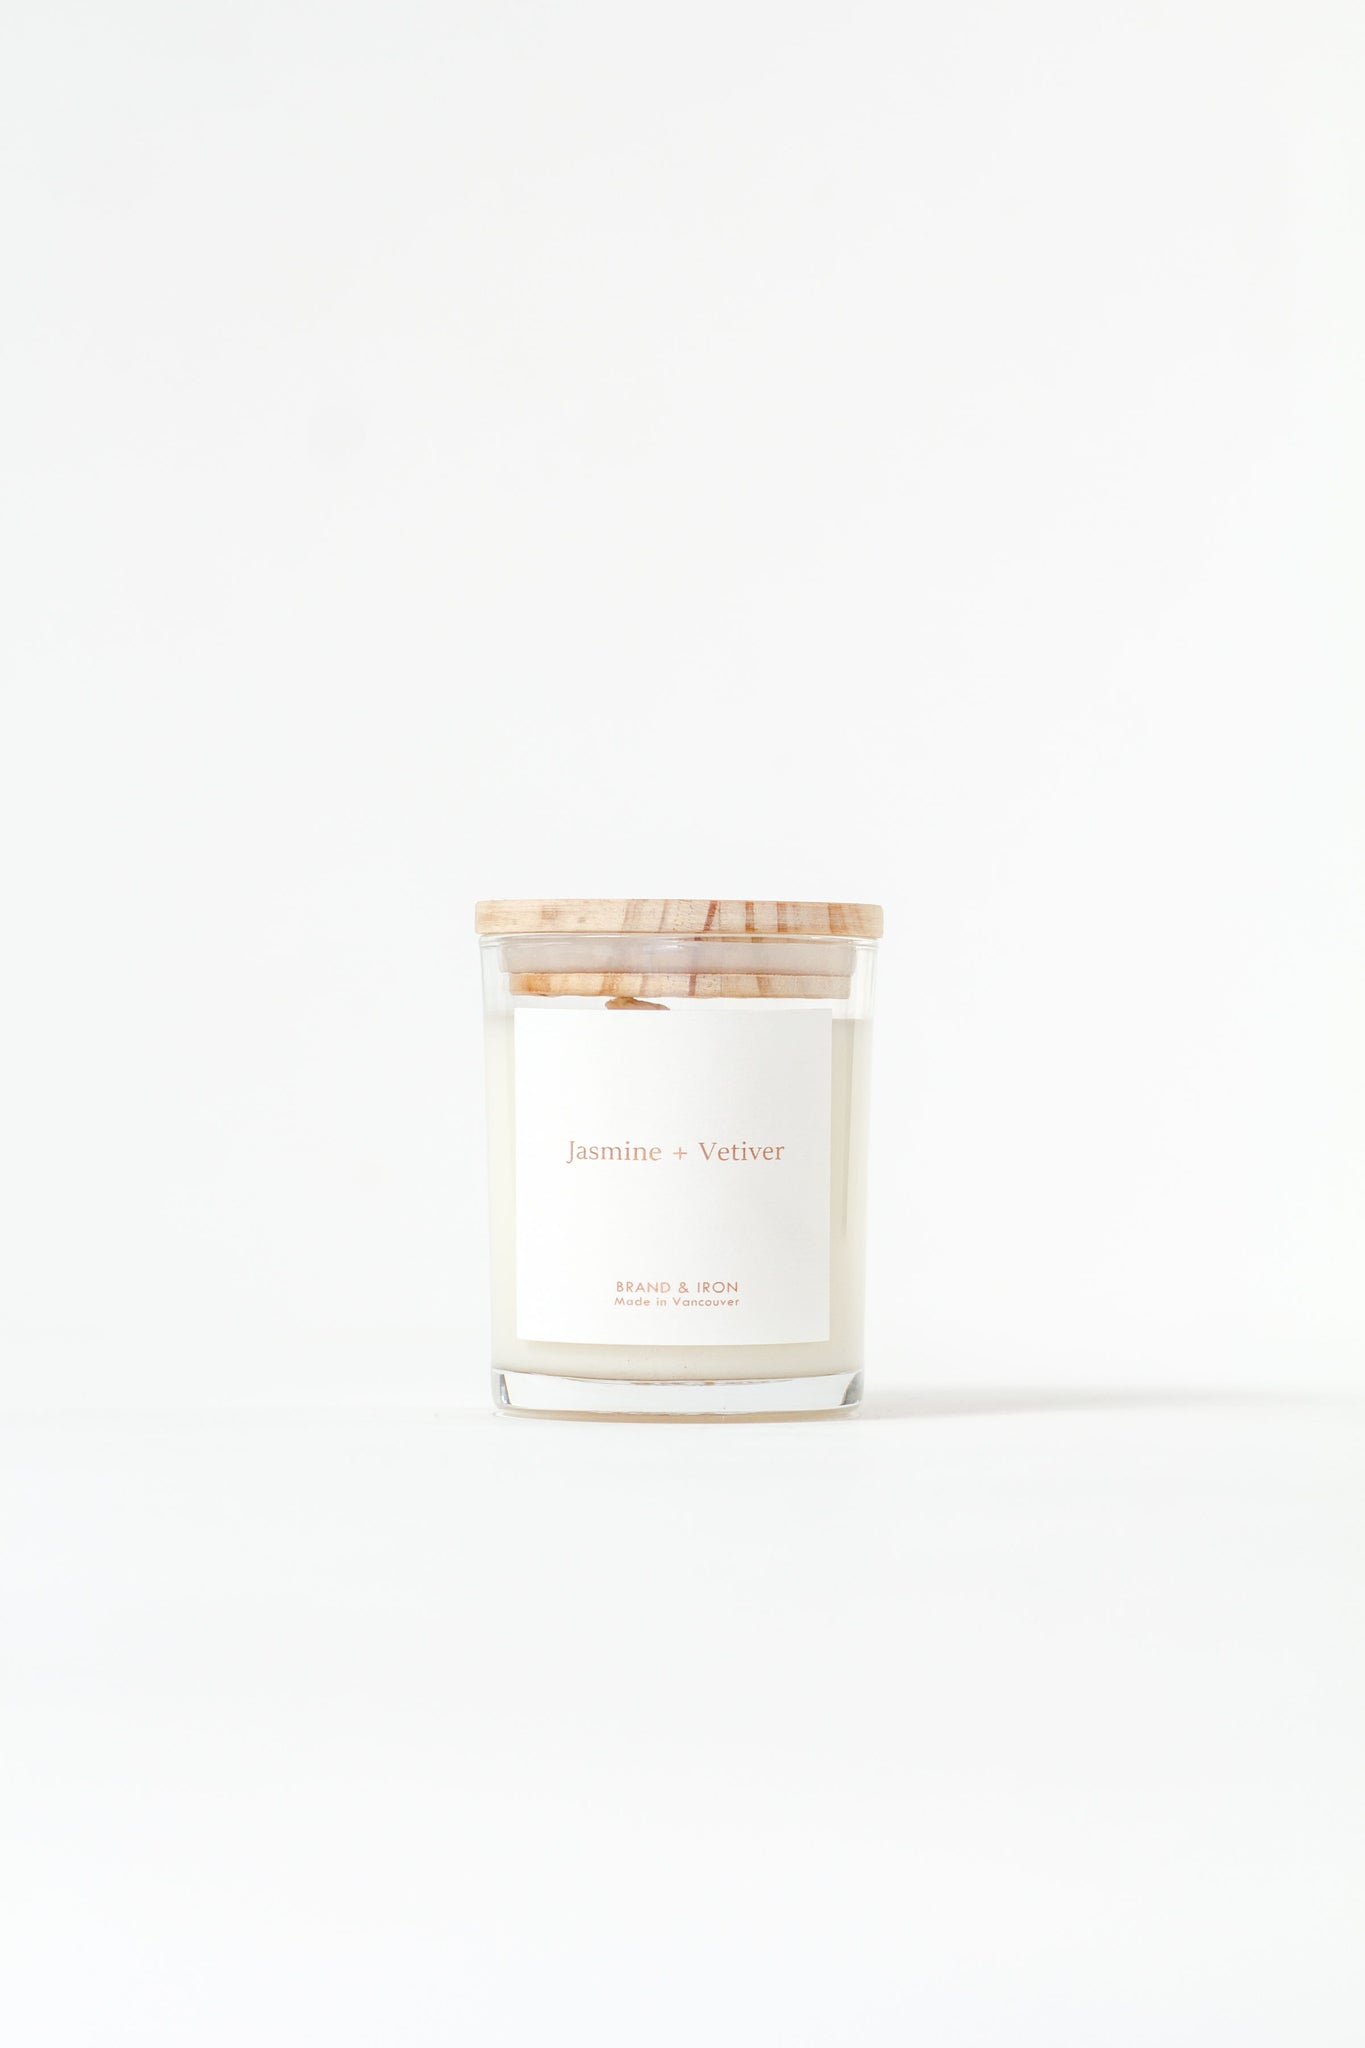 Jasmine + Vetiver Candle | Brand and Iron